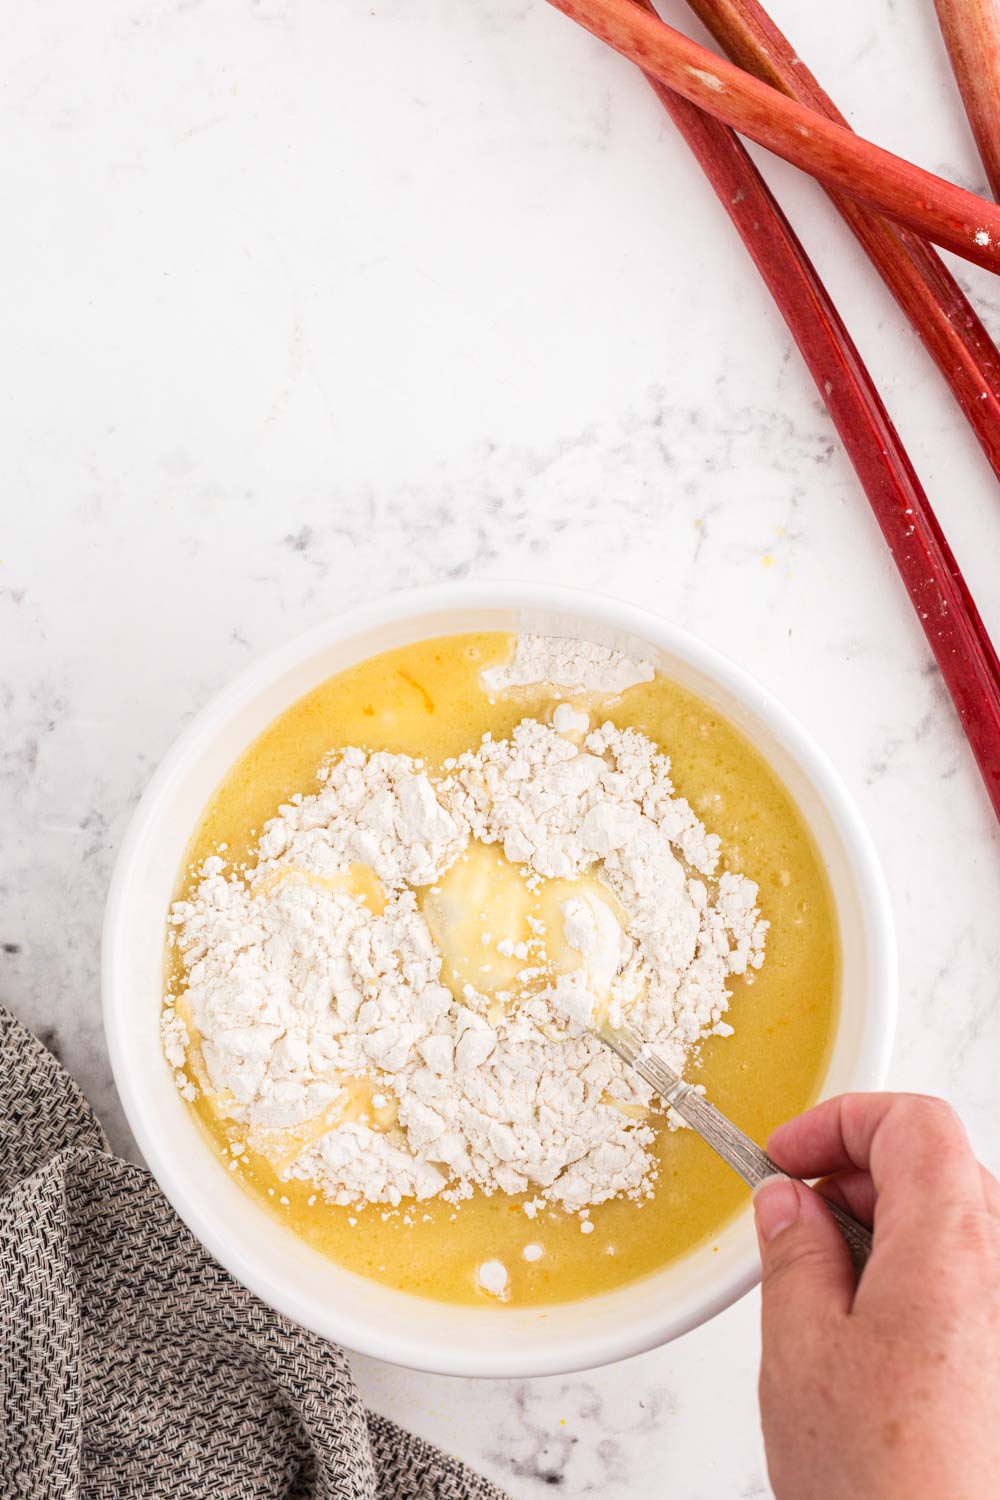 Gently folding the dry ingredients into the wet ingredients in a mixing bowl atop a white marble surface with rhubarb stalks and a kitchen cloth in the background